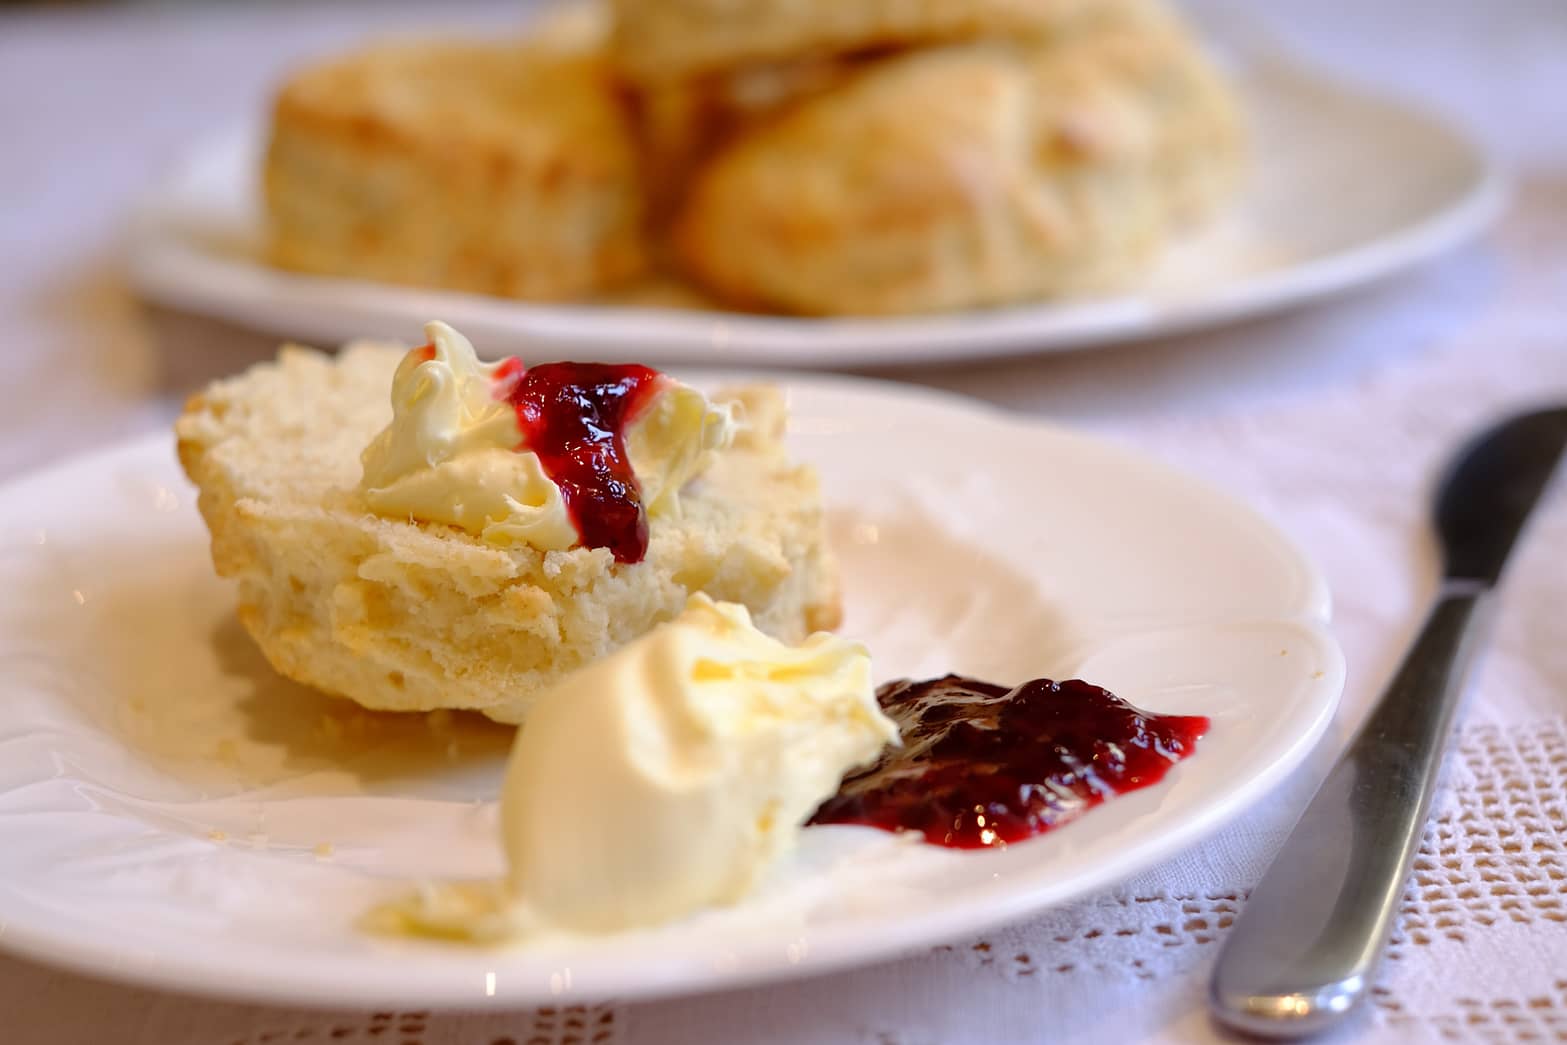 clotted cream on plate ready to serve with scone